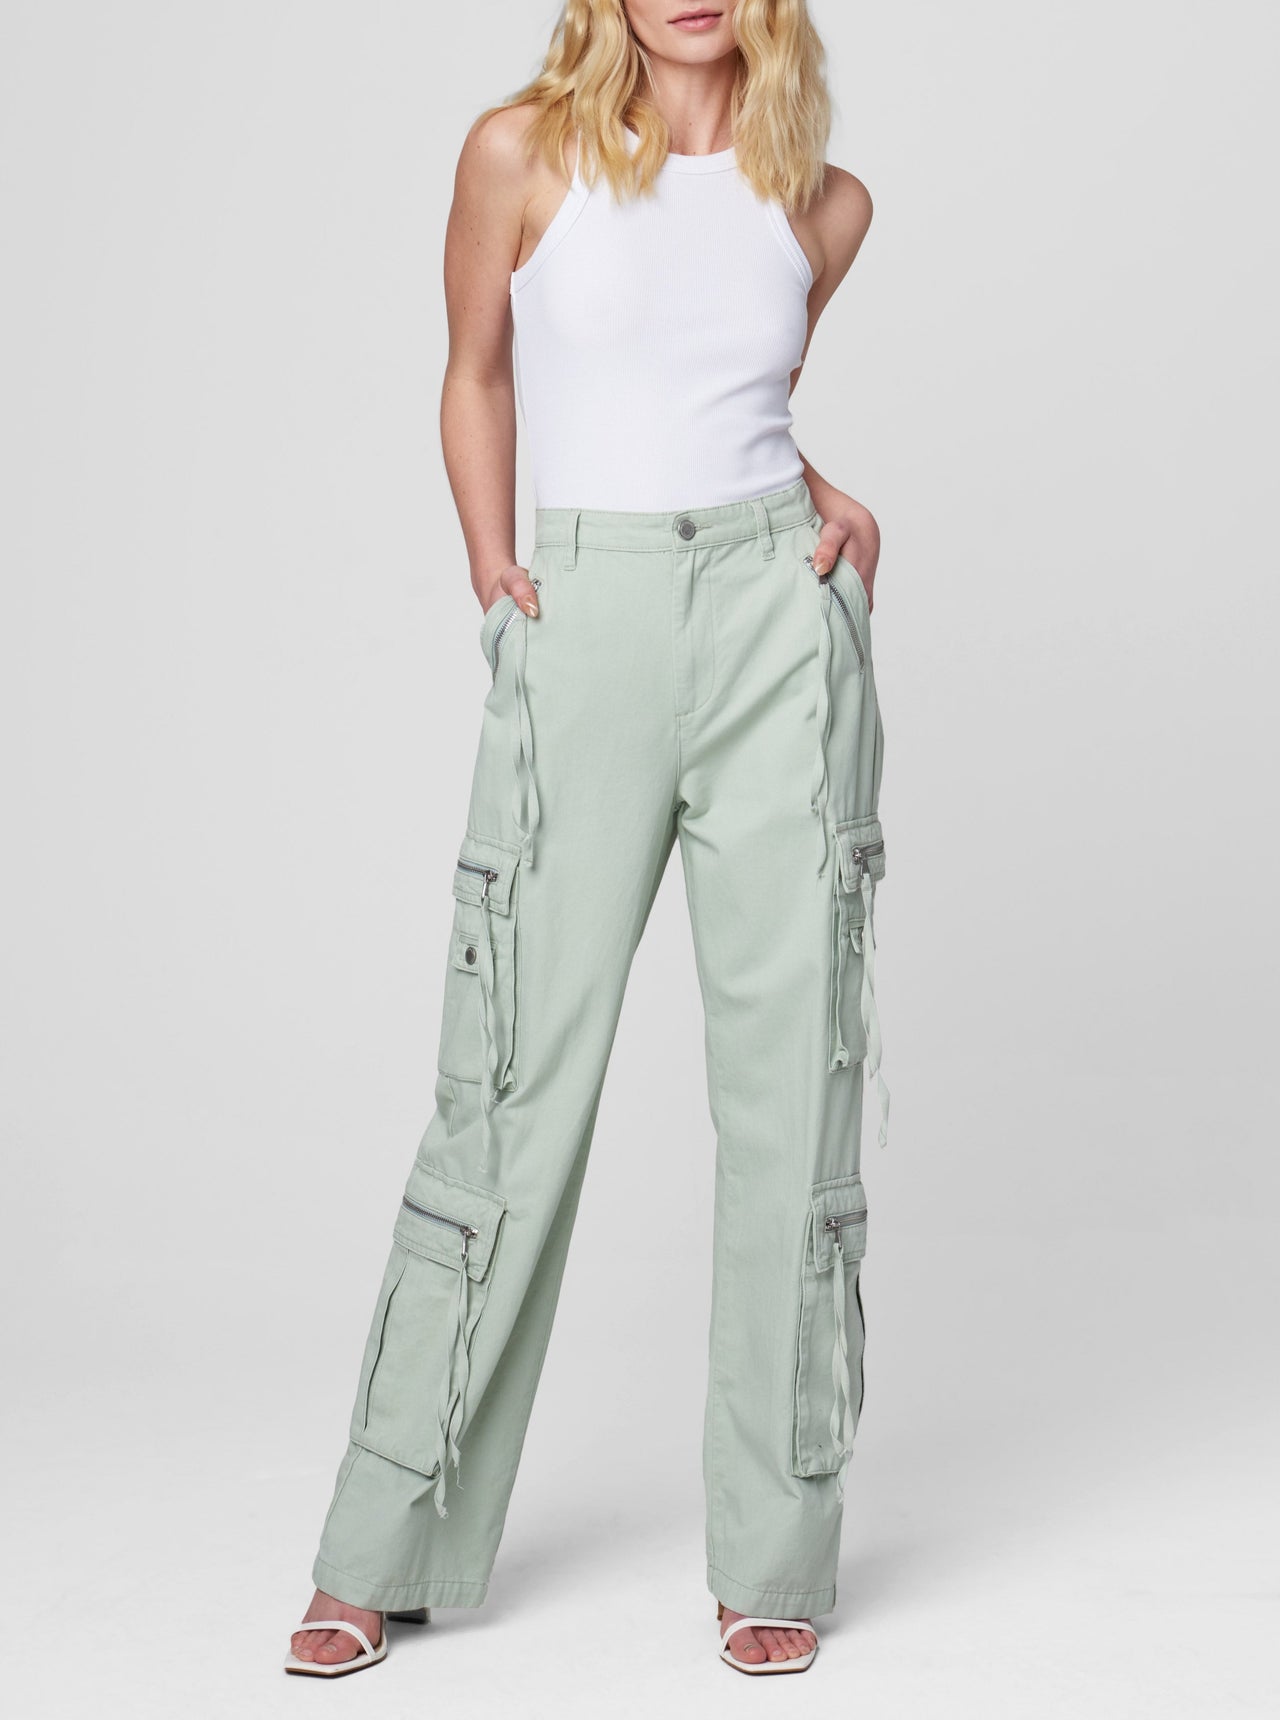 Zen Time Linen Cargo Pocket Pant, Bottoms by Blank NYC | LIT Boutique